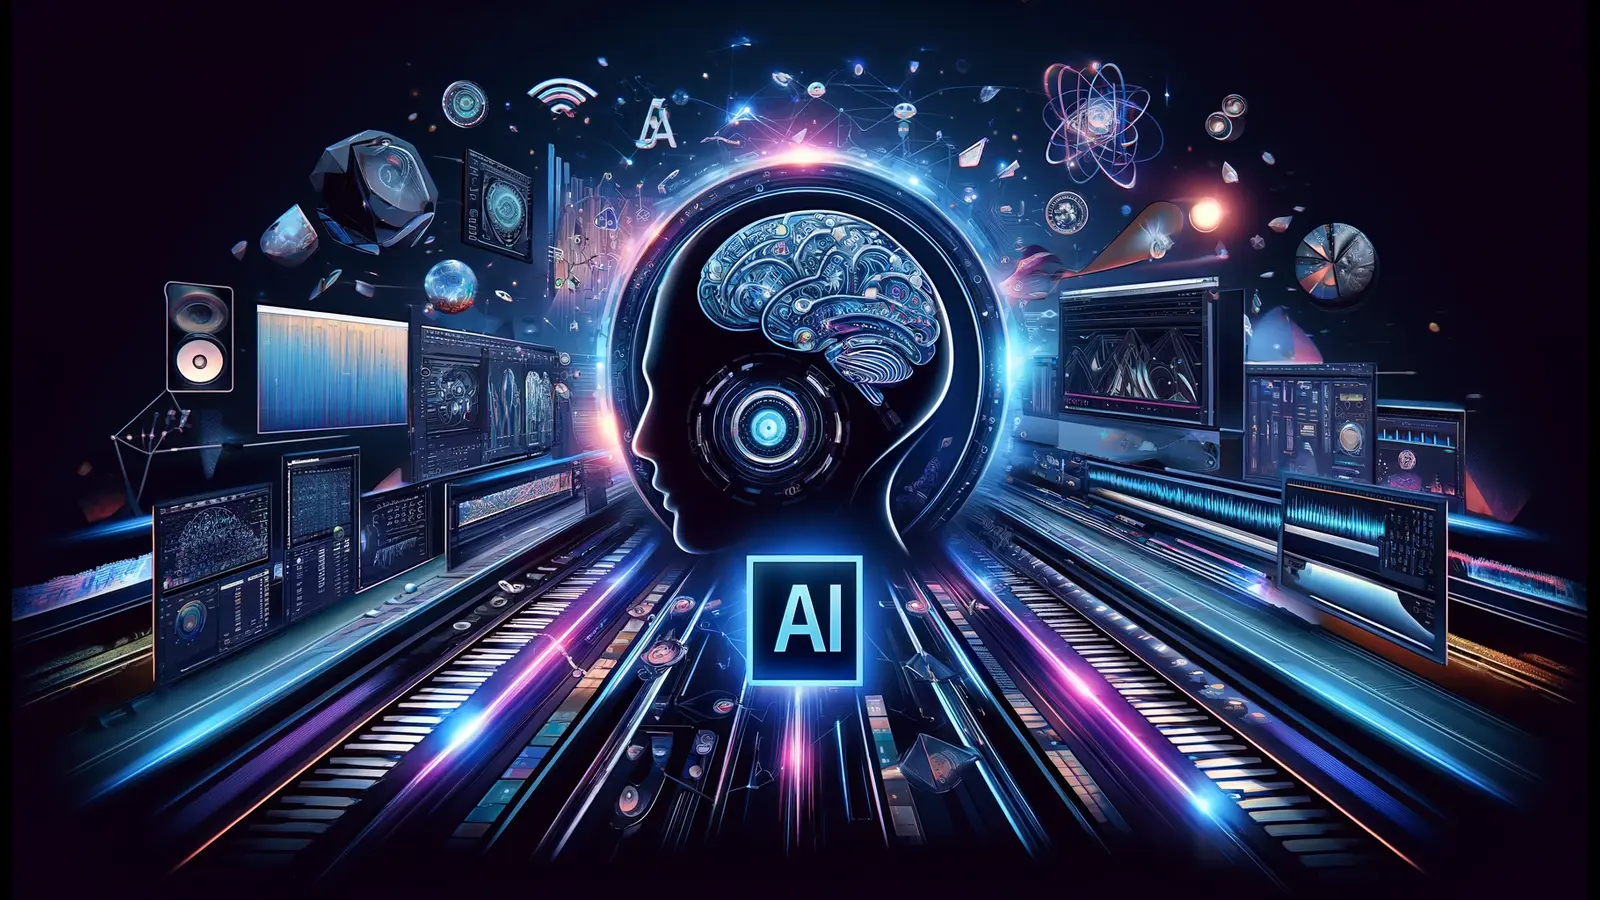 Adobe's Premiere Pro Embraces AI for Enhanced Editing Capabilities